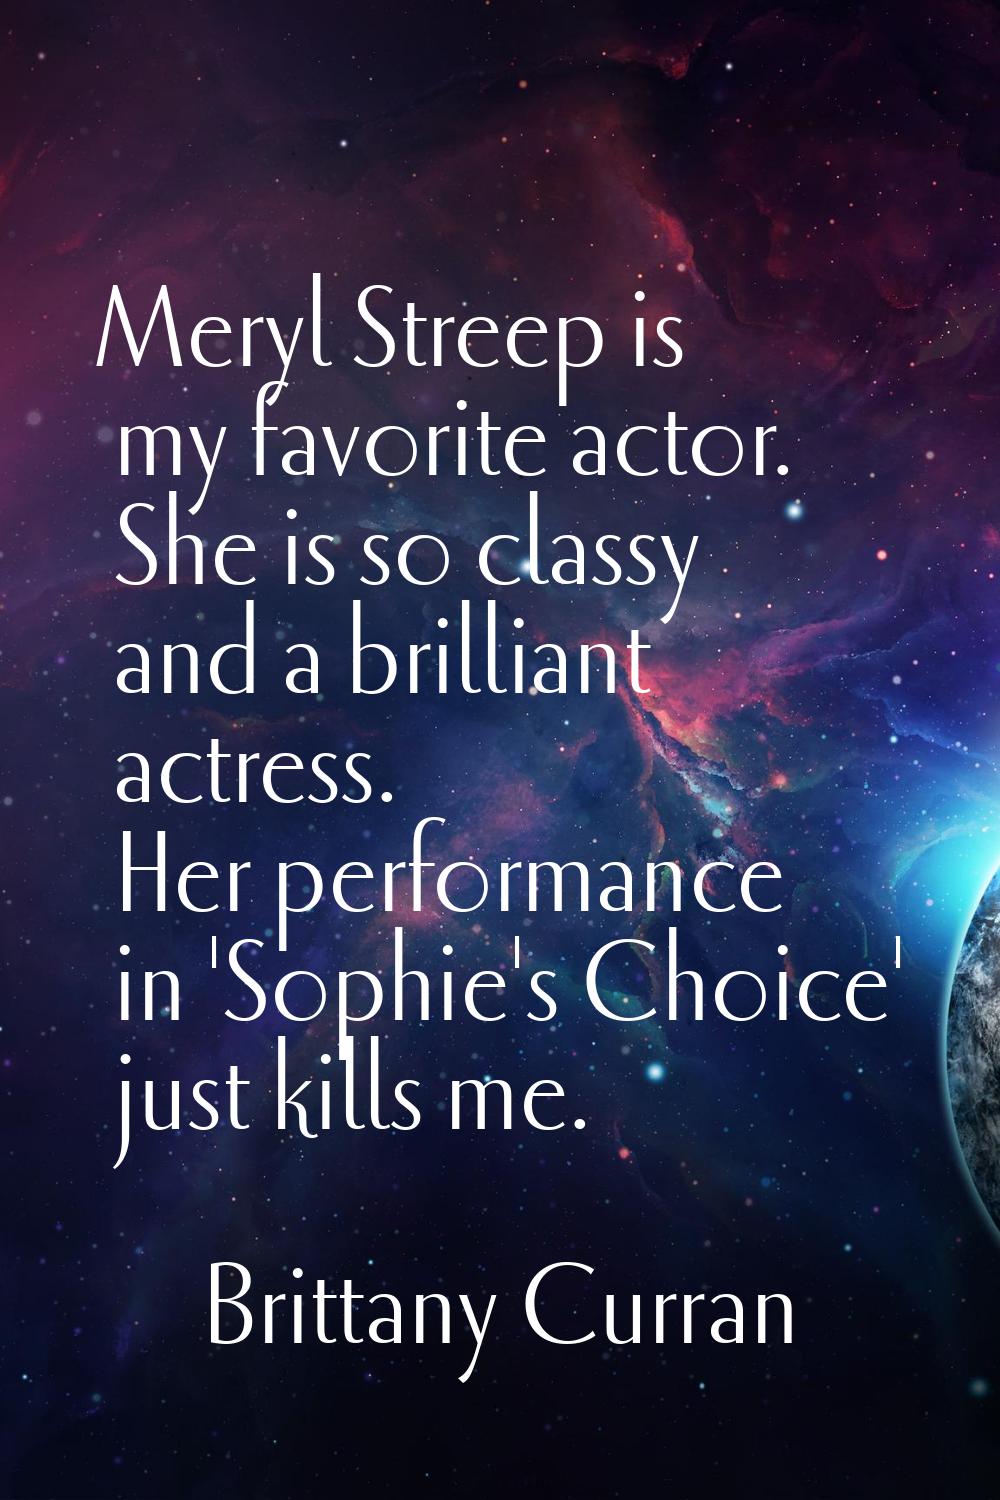 Meryl Streep is my favorite actor. She is so classy and a brilliant actress. Her performance in 'So